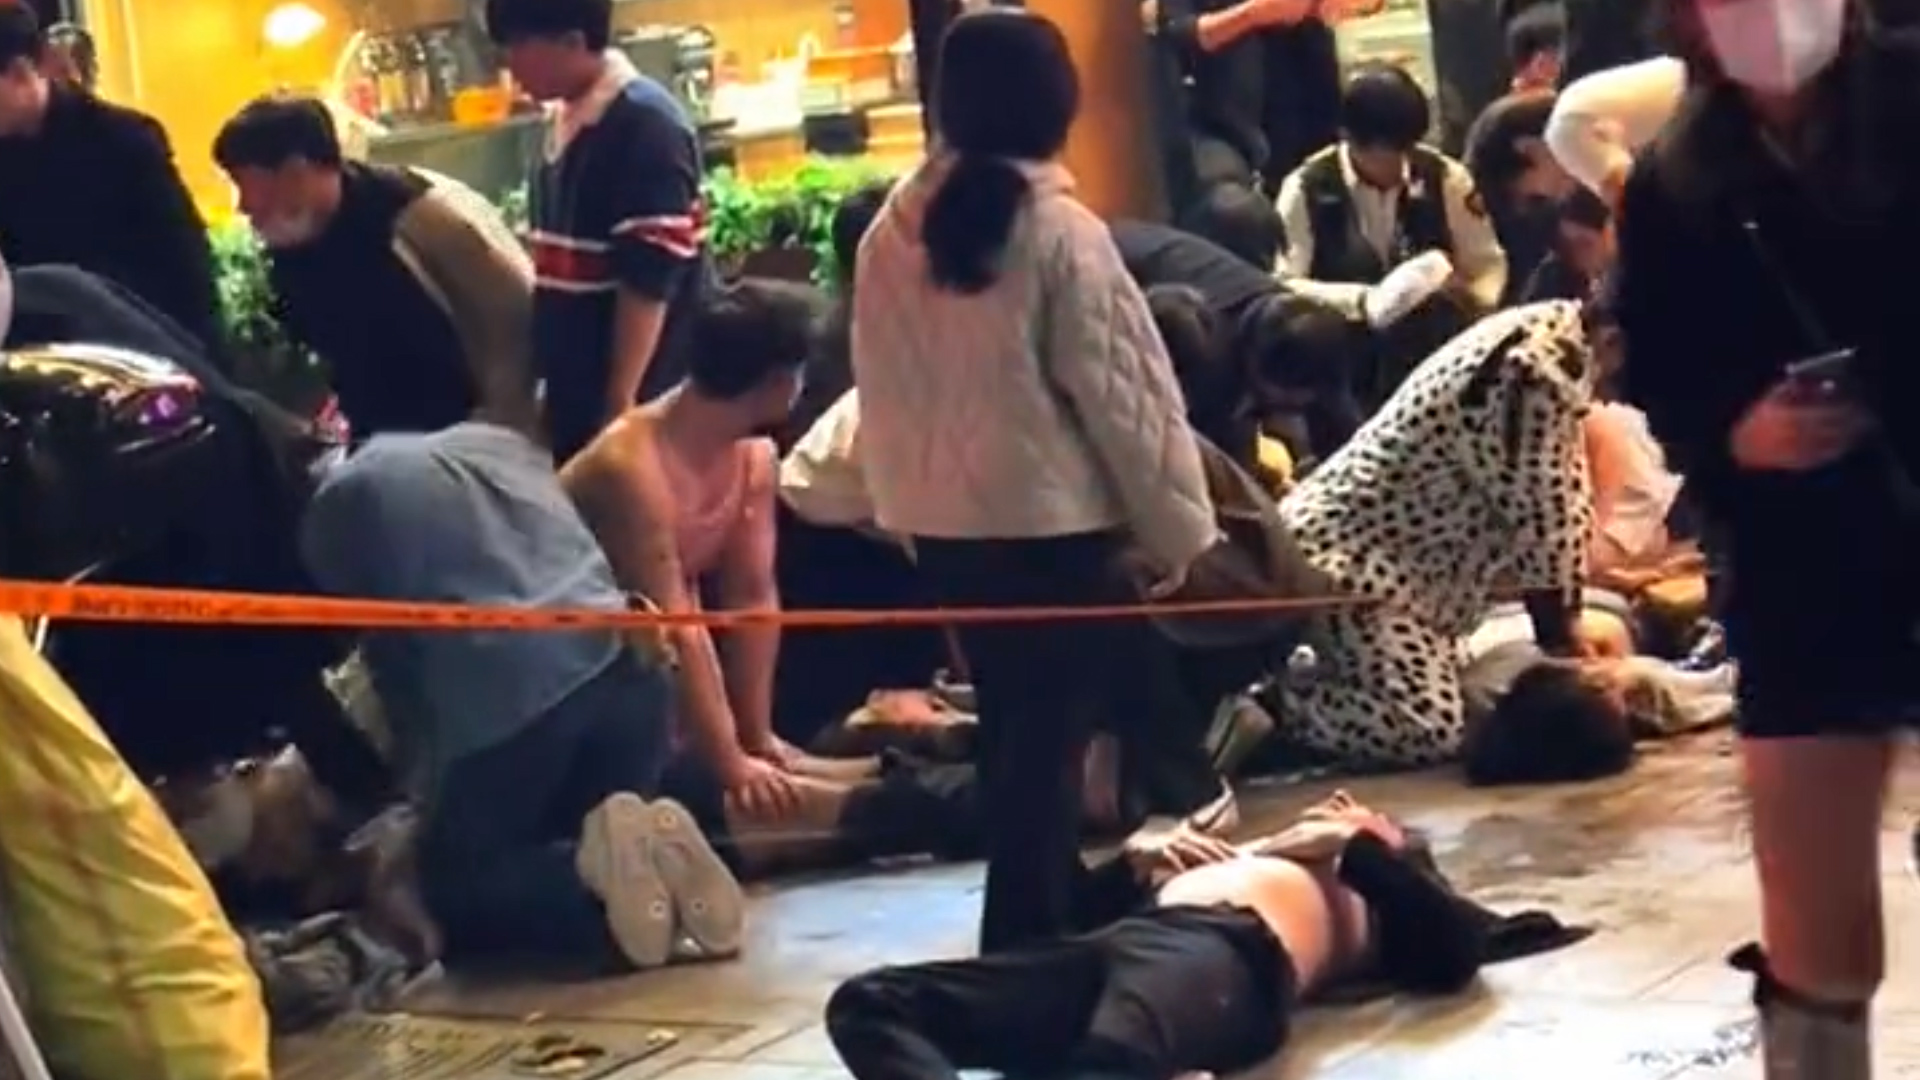 People perform CPR on victims in the streets 